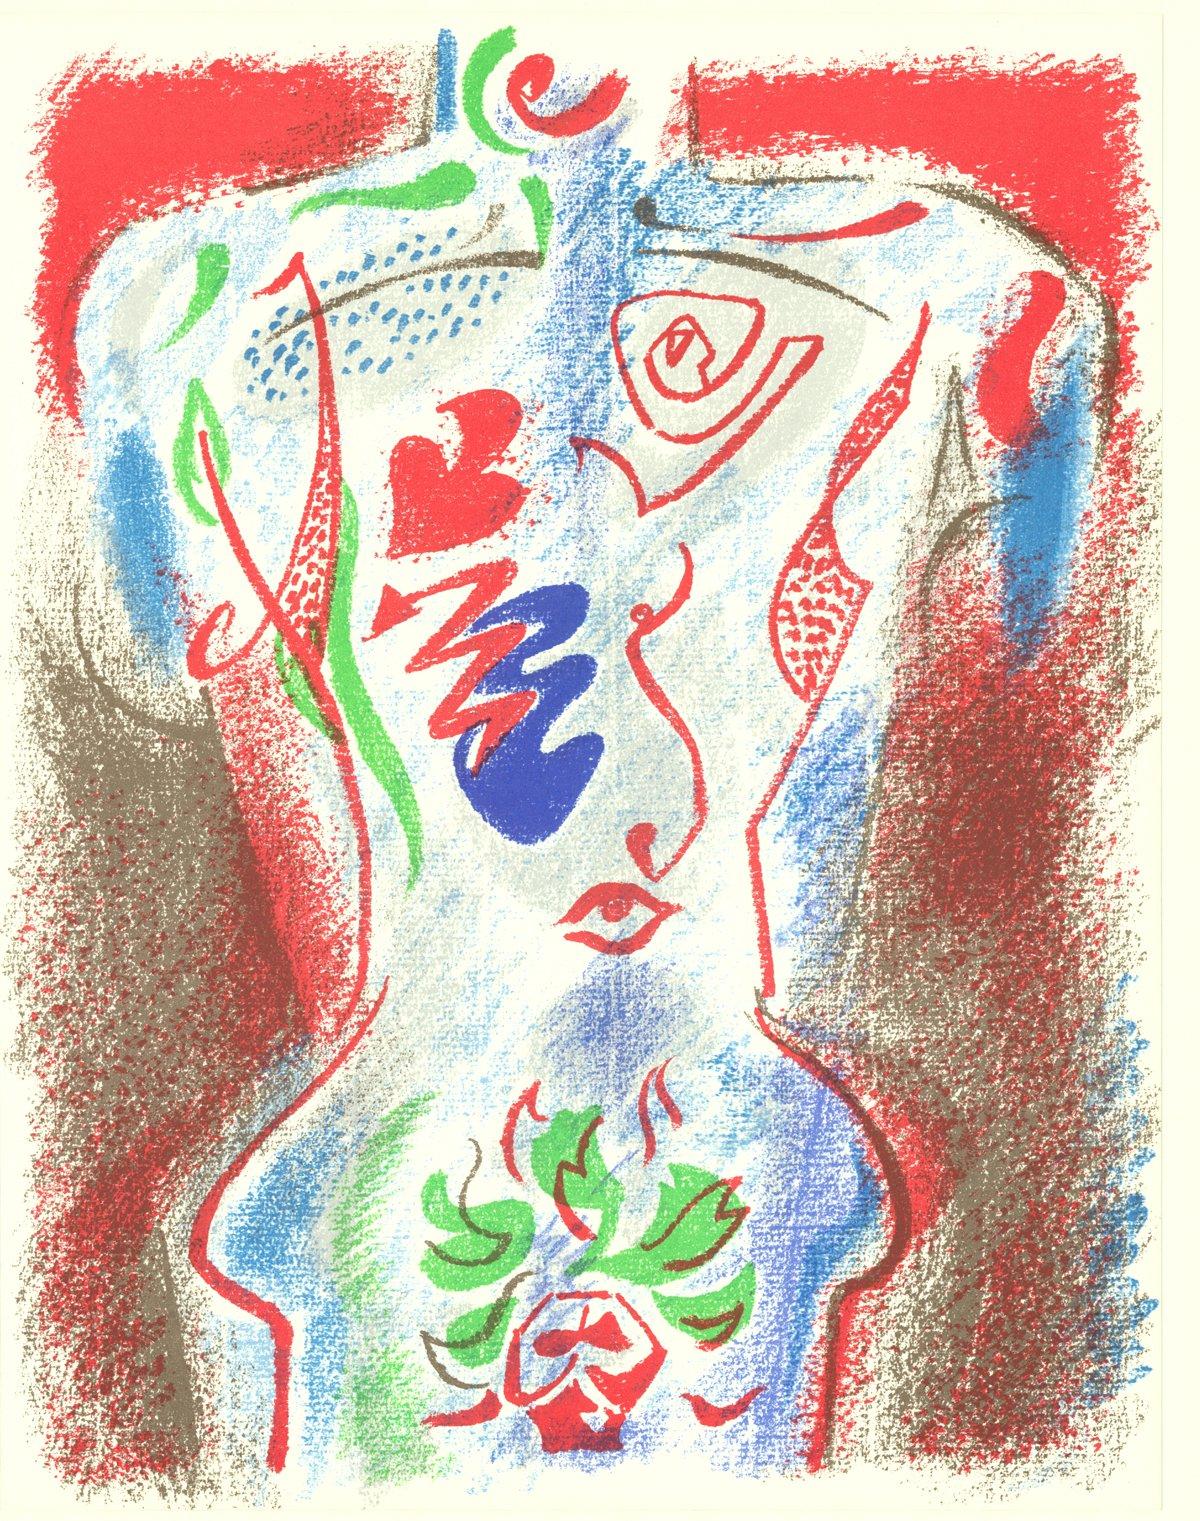 1972 Andre Masson 'XXe Siecle no. 38' Mehrfarbige, rote Lithographie des Expressionismus, 1972 – Print von André Masson